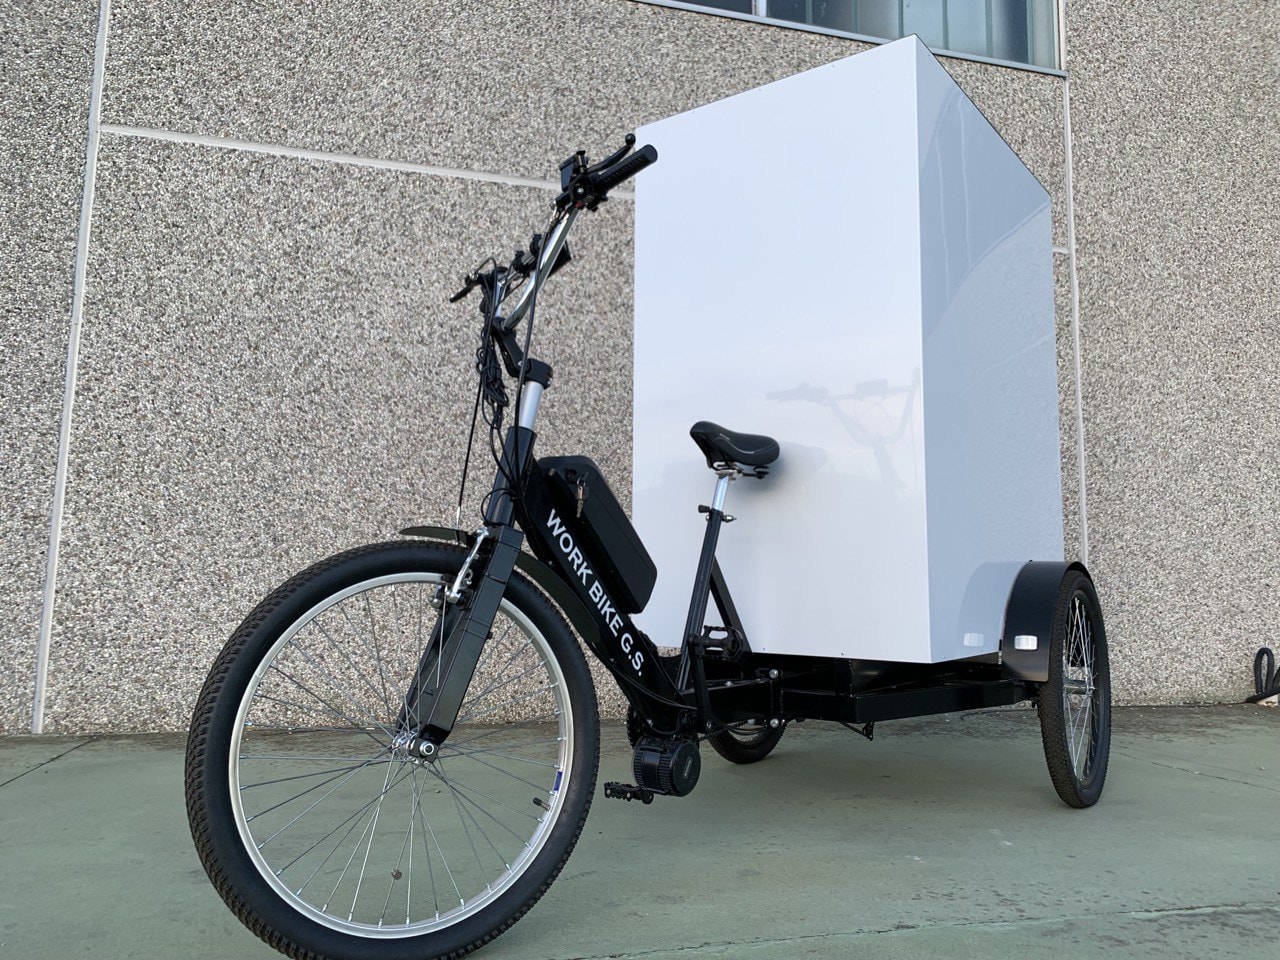 TRICICLO-CARGO-BIKE-ITALY-DELIVERY-BASIC-STREET-FOOD-3